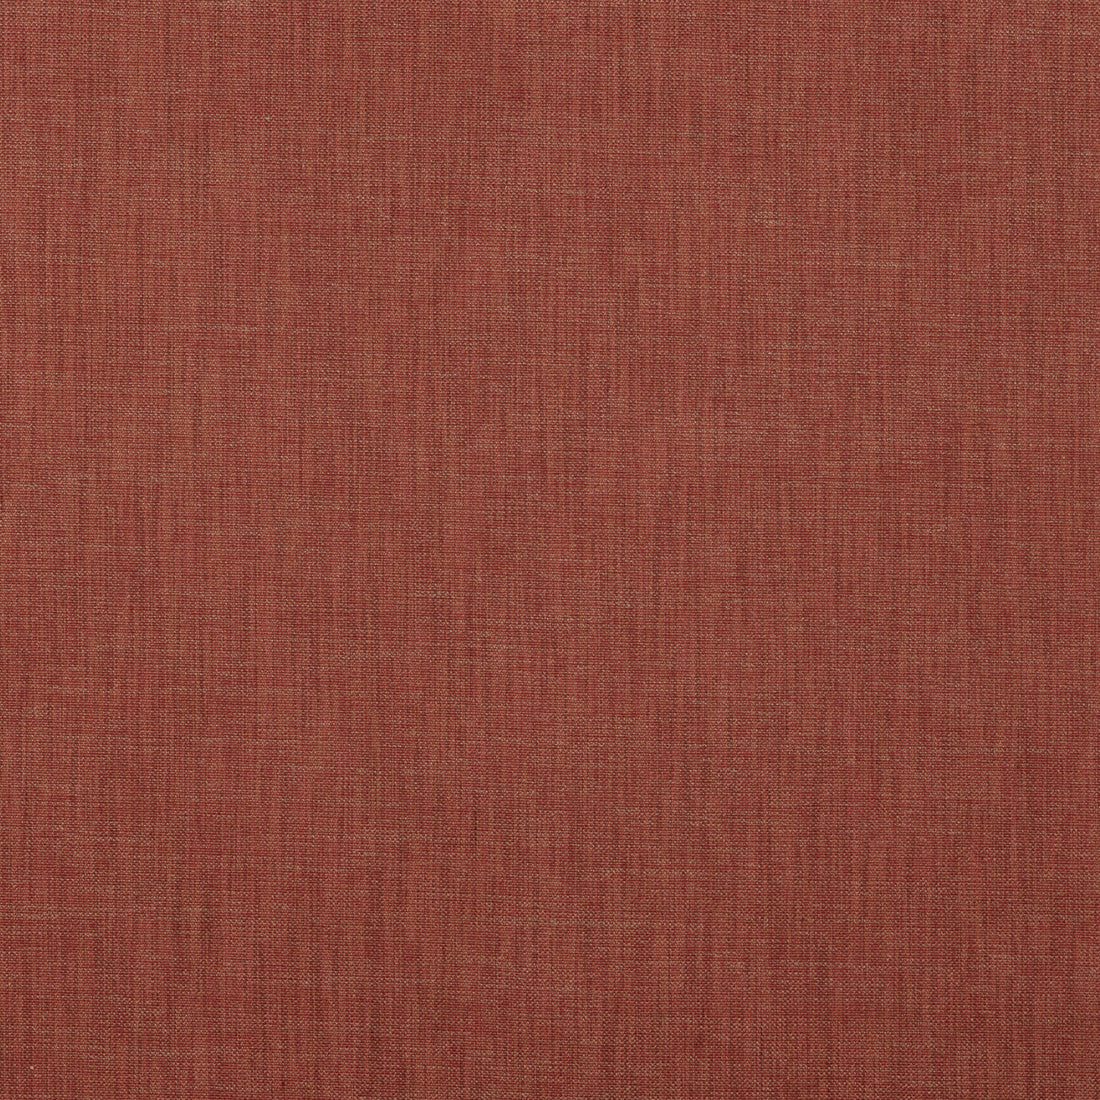 Darwen fabric in tomato color - pattern BF10957.450.0 - by G P &amp; J Baker in the Baker House Textures collection